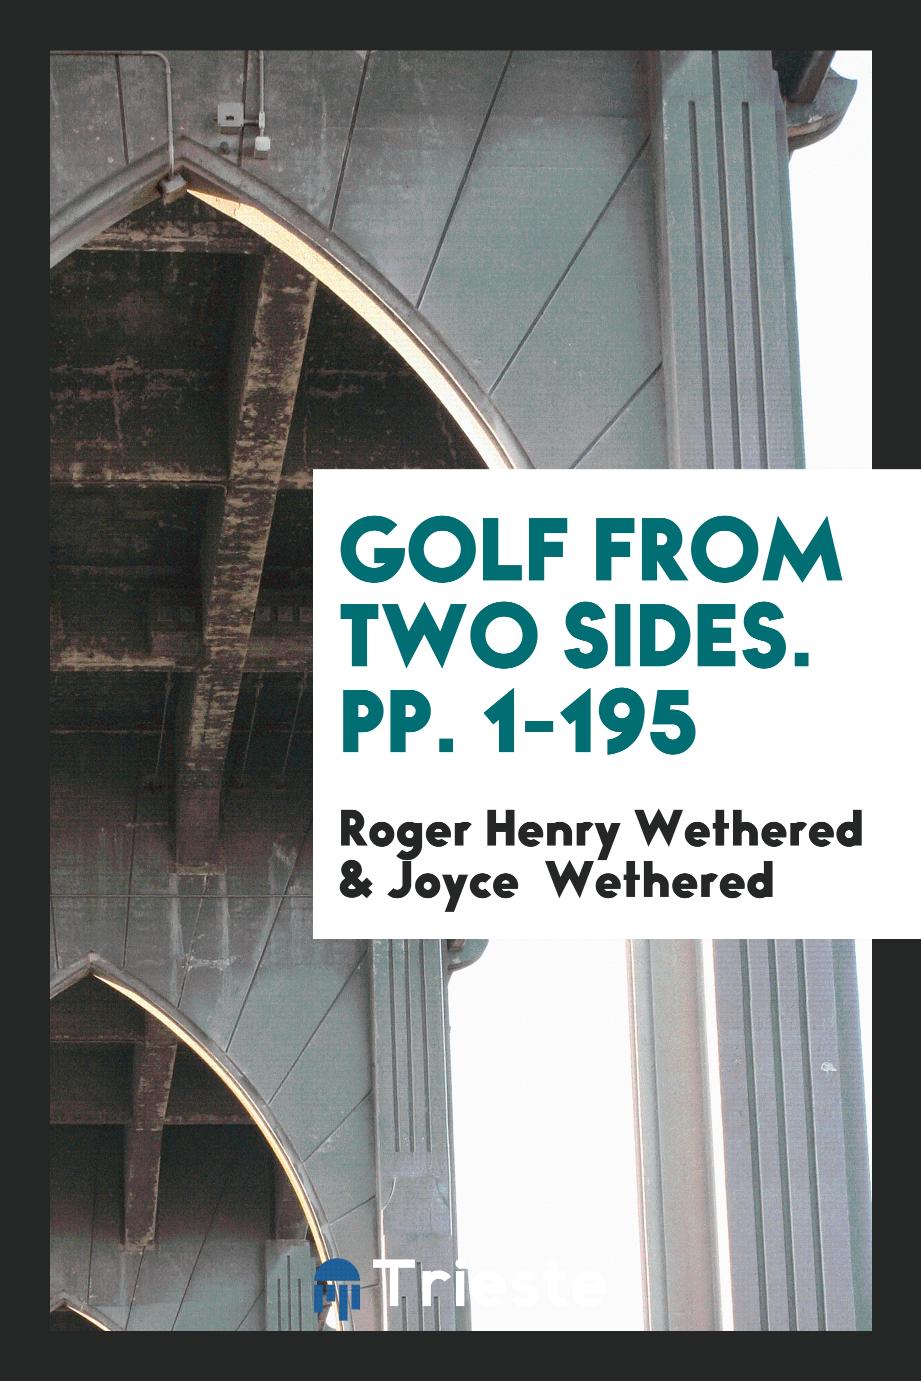 Golf from Two Sides. pp. 1-195